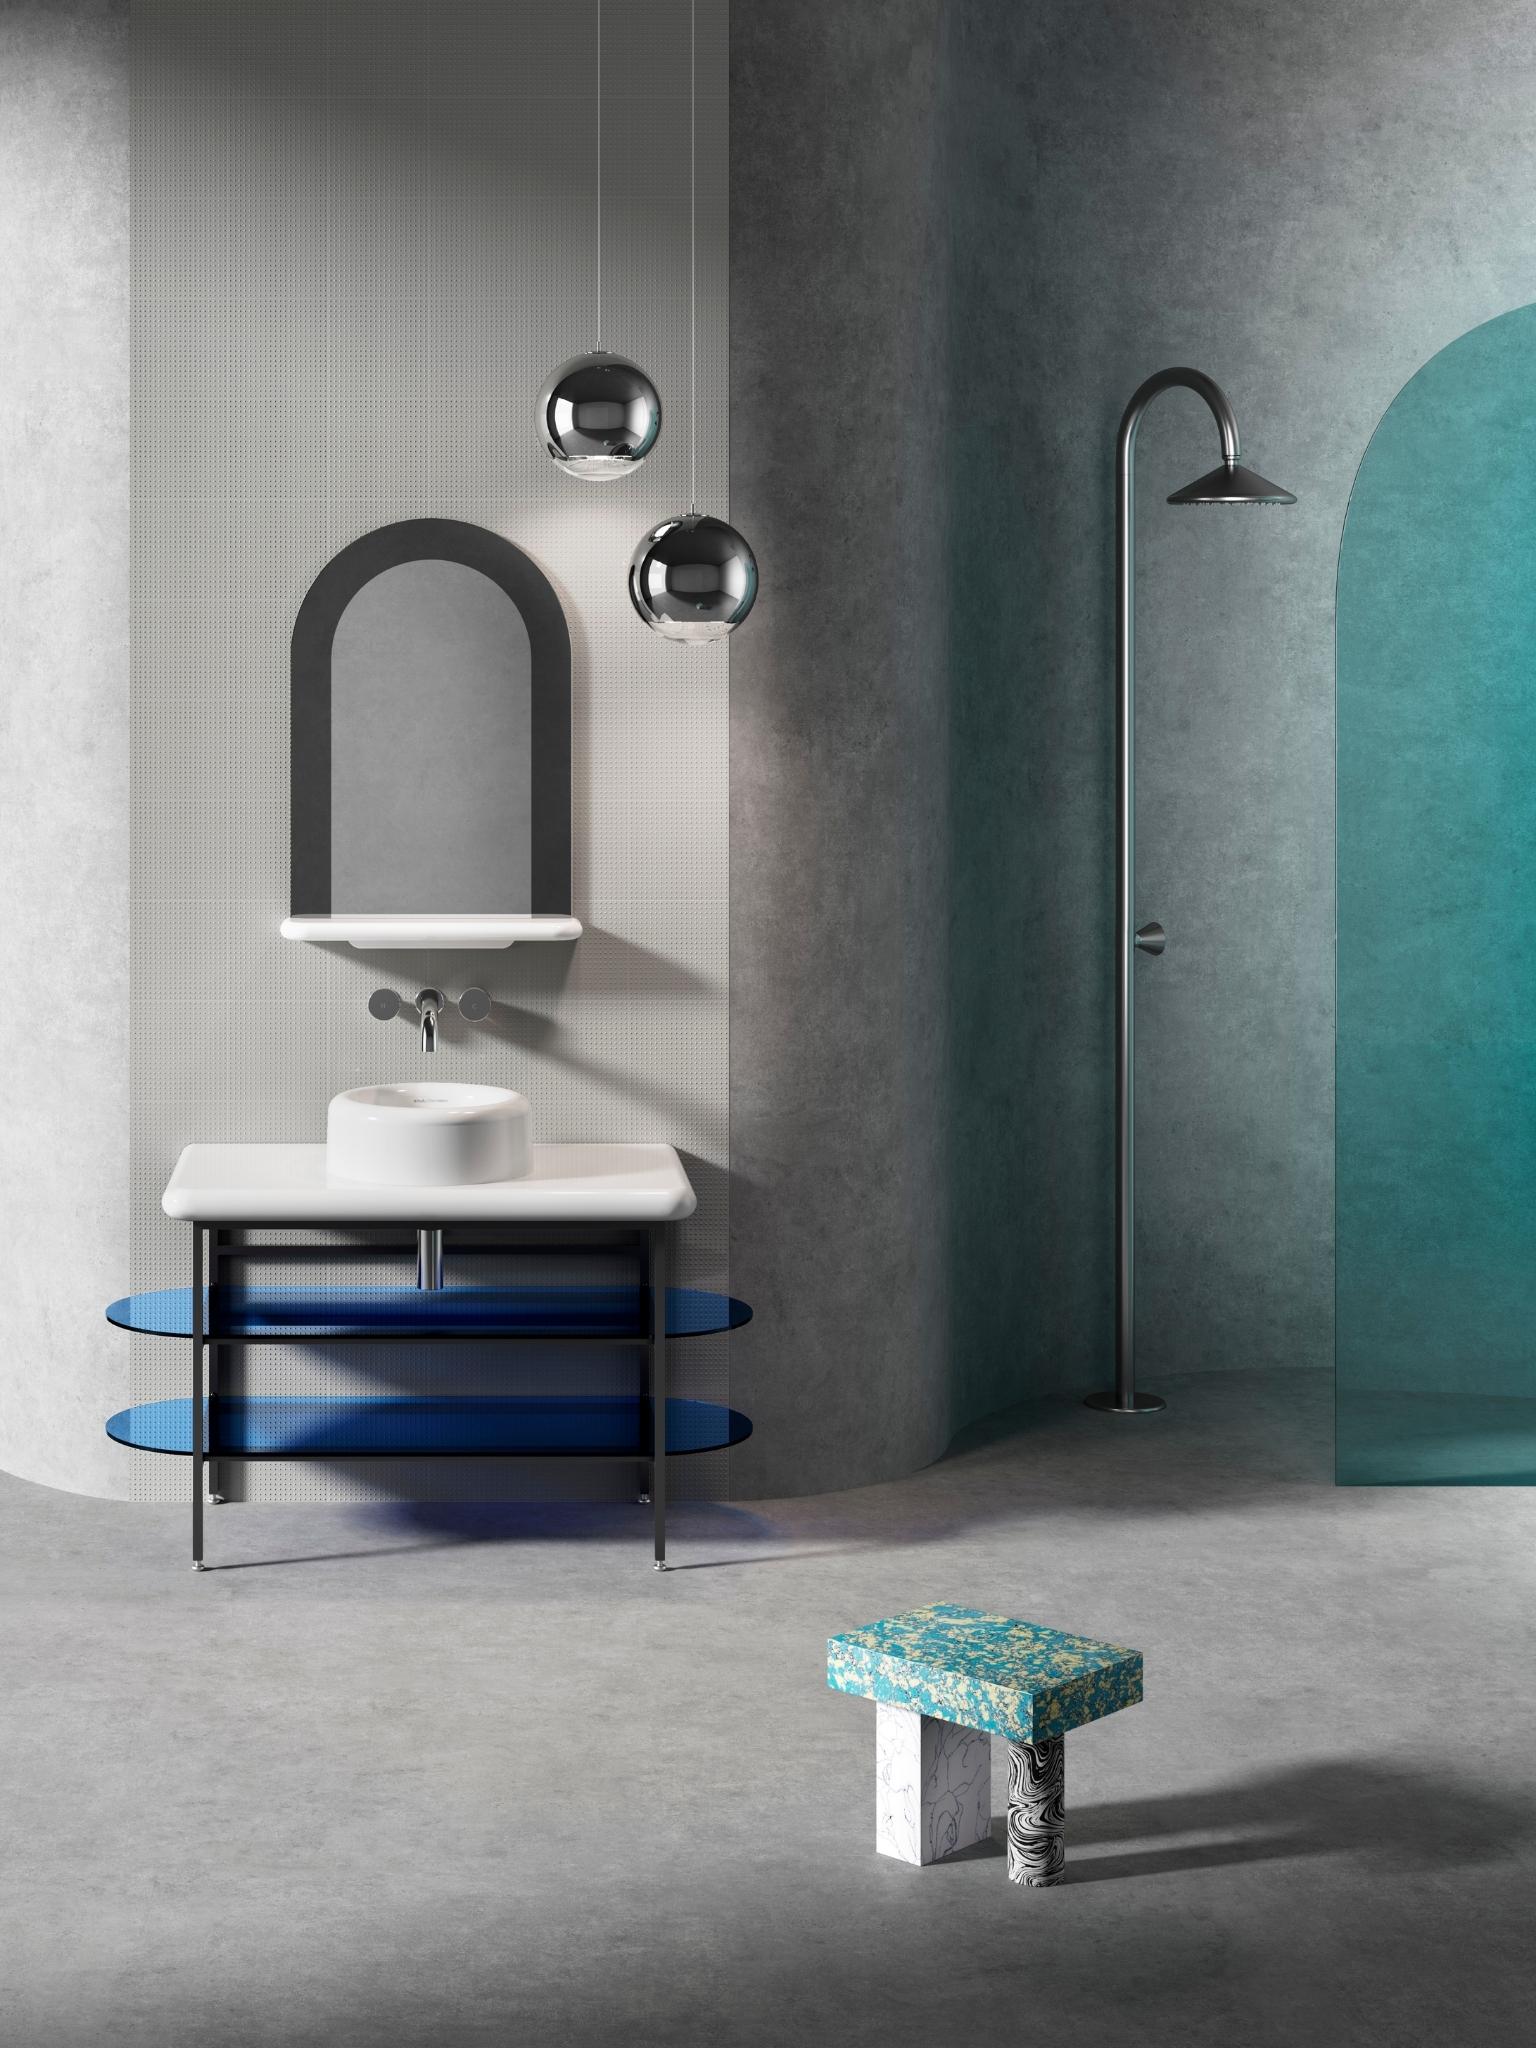 bathroom, VitrA’s Bathroom Collection Offers an Alternative to Traditional Designs